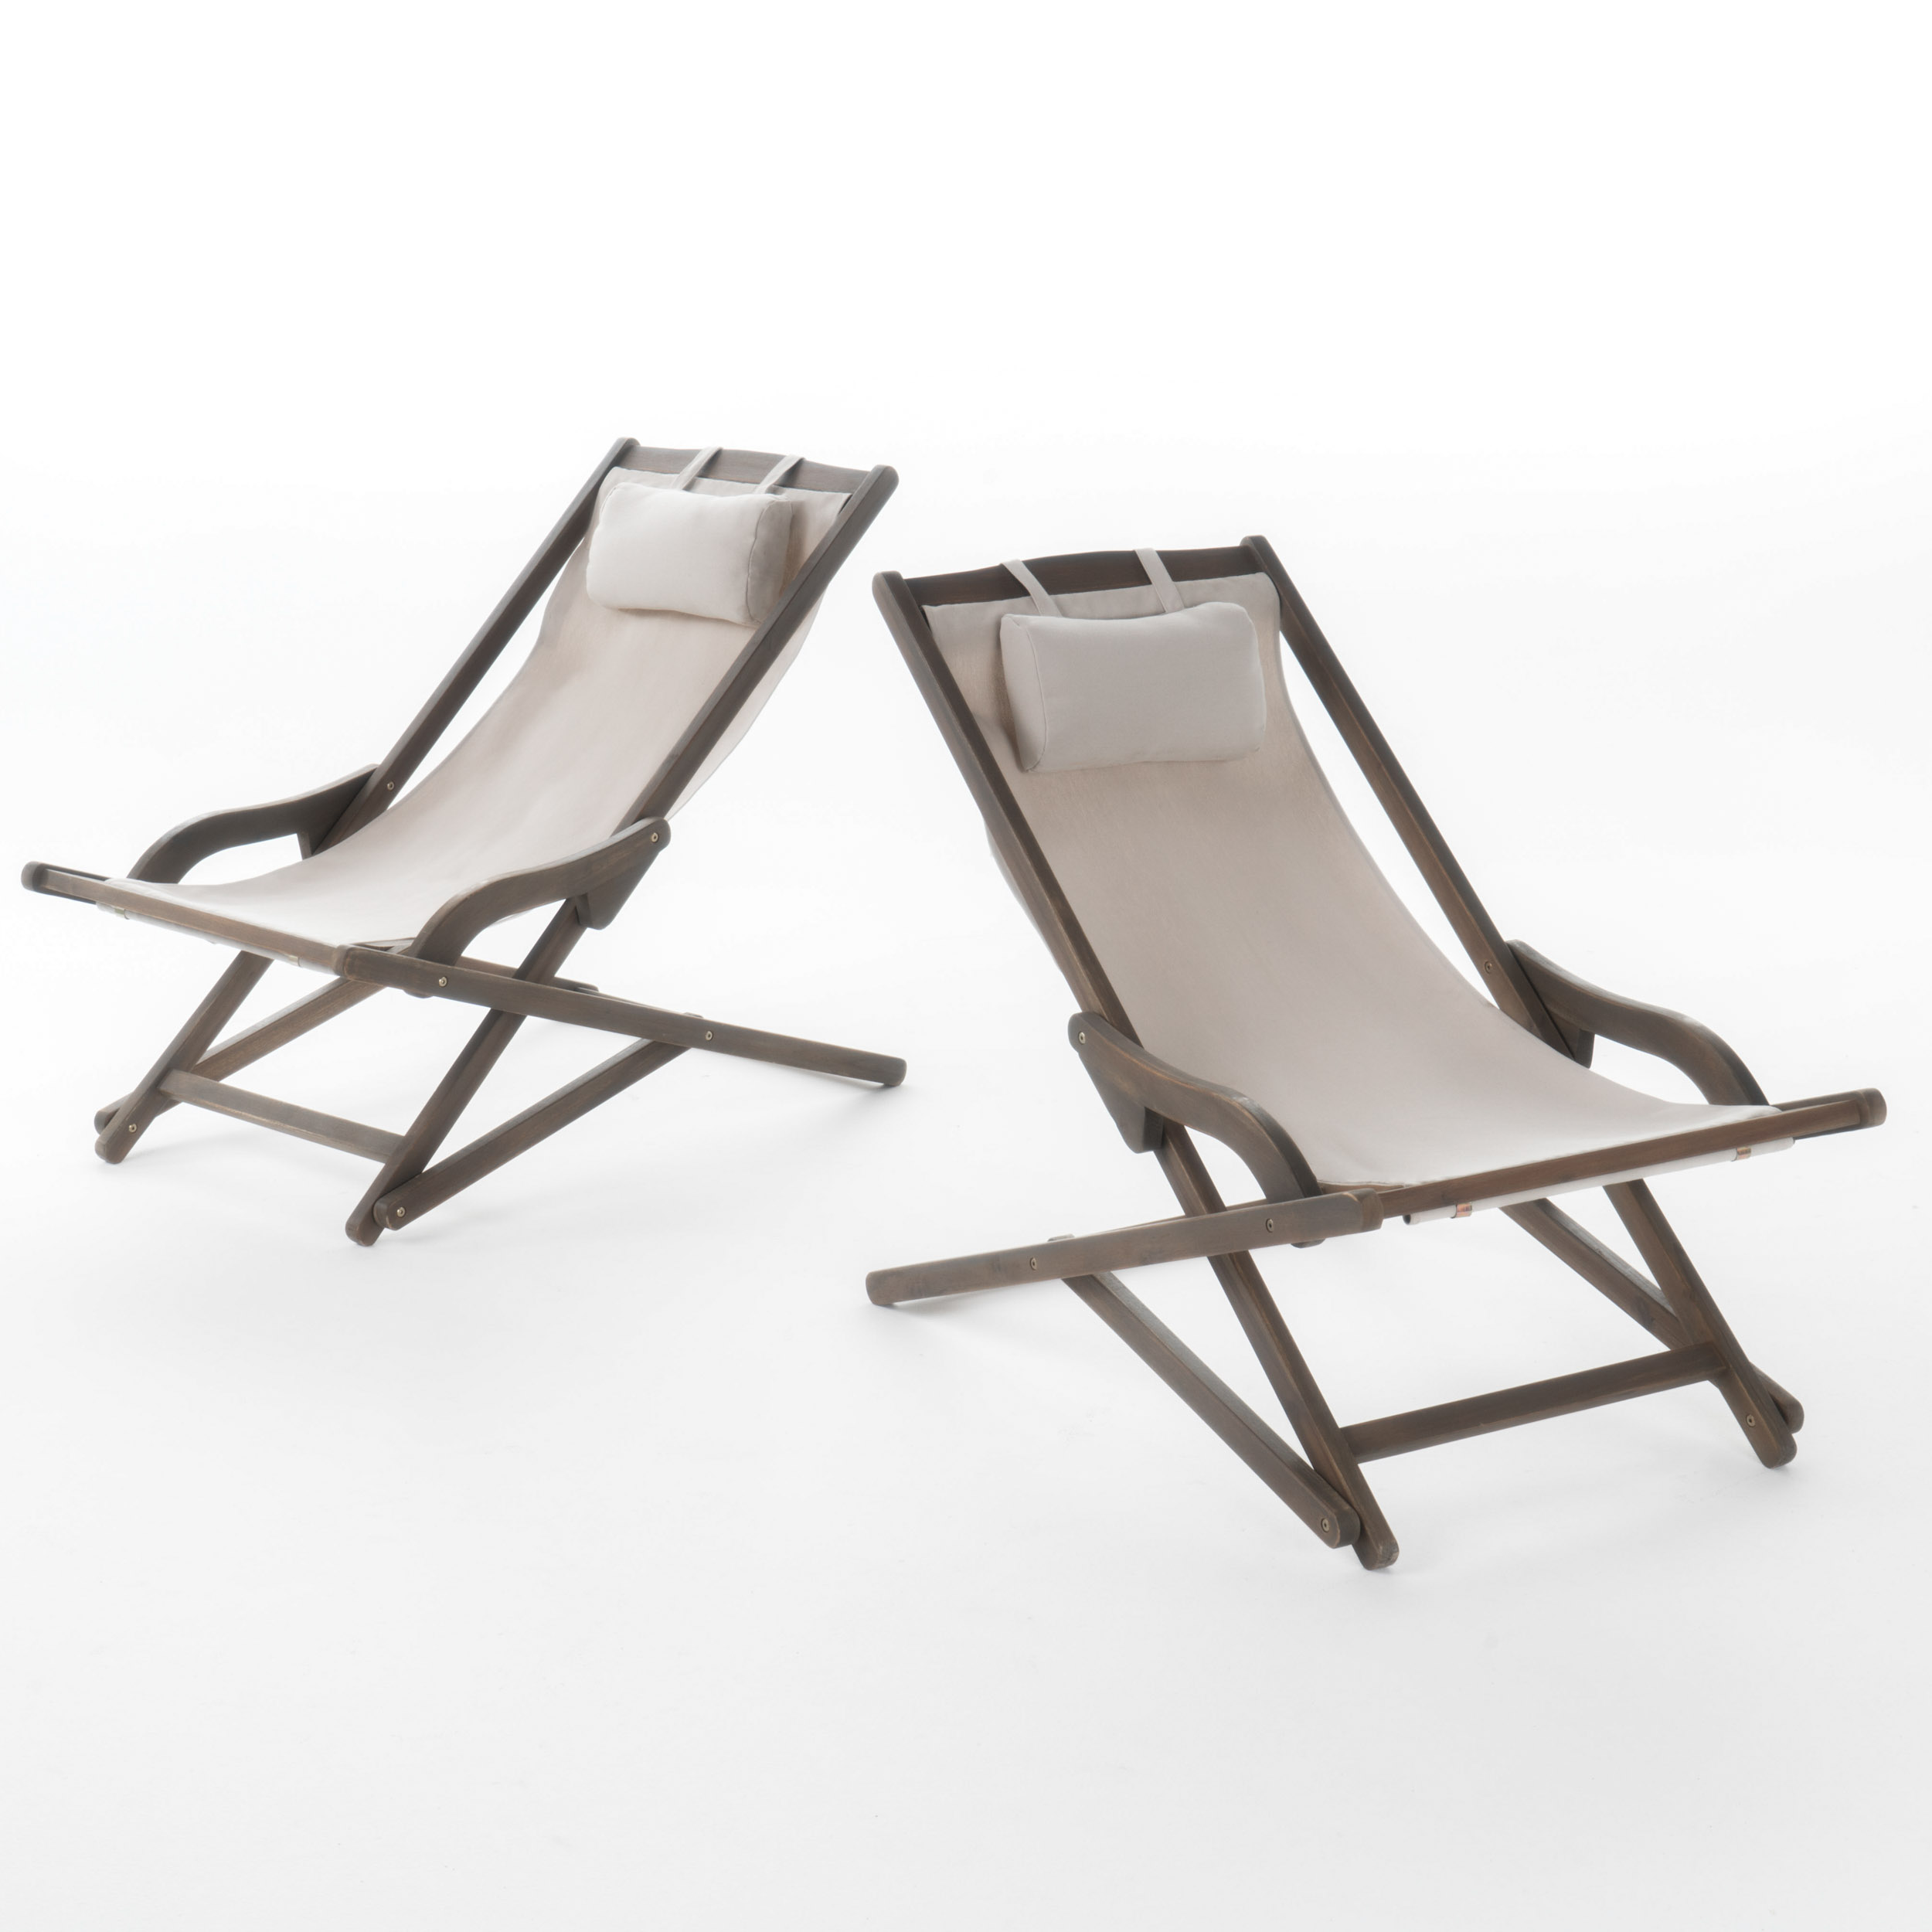 Northland Outdoor Wood and Canvas Sling Chair, Set of 2, Beige - image 1 of 6